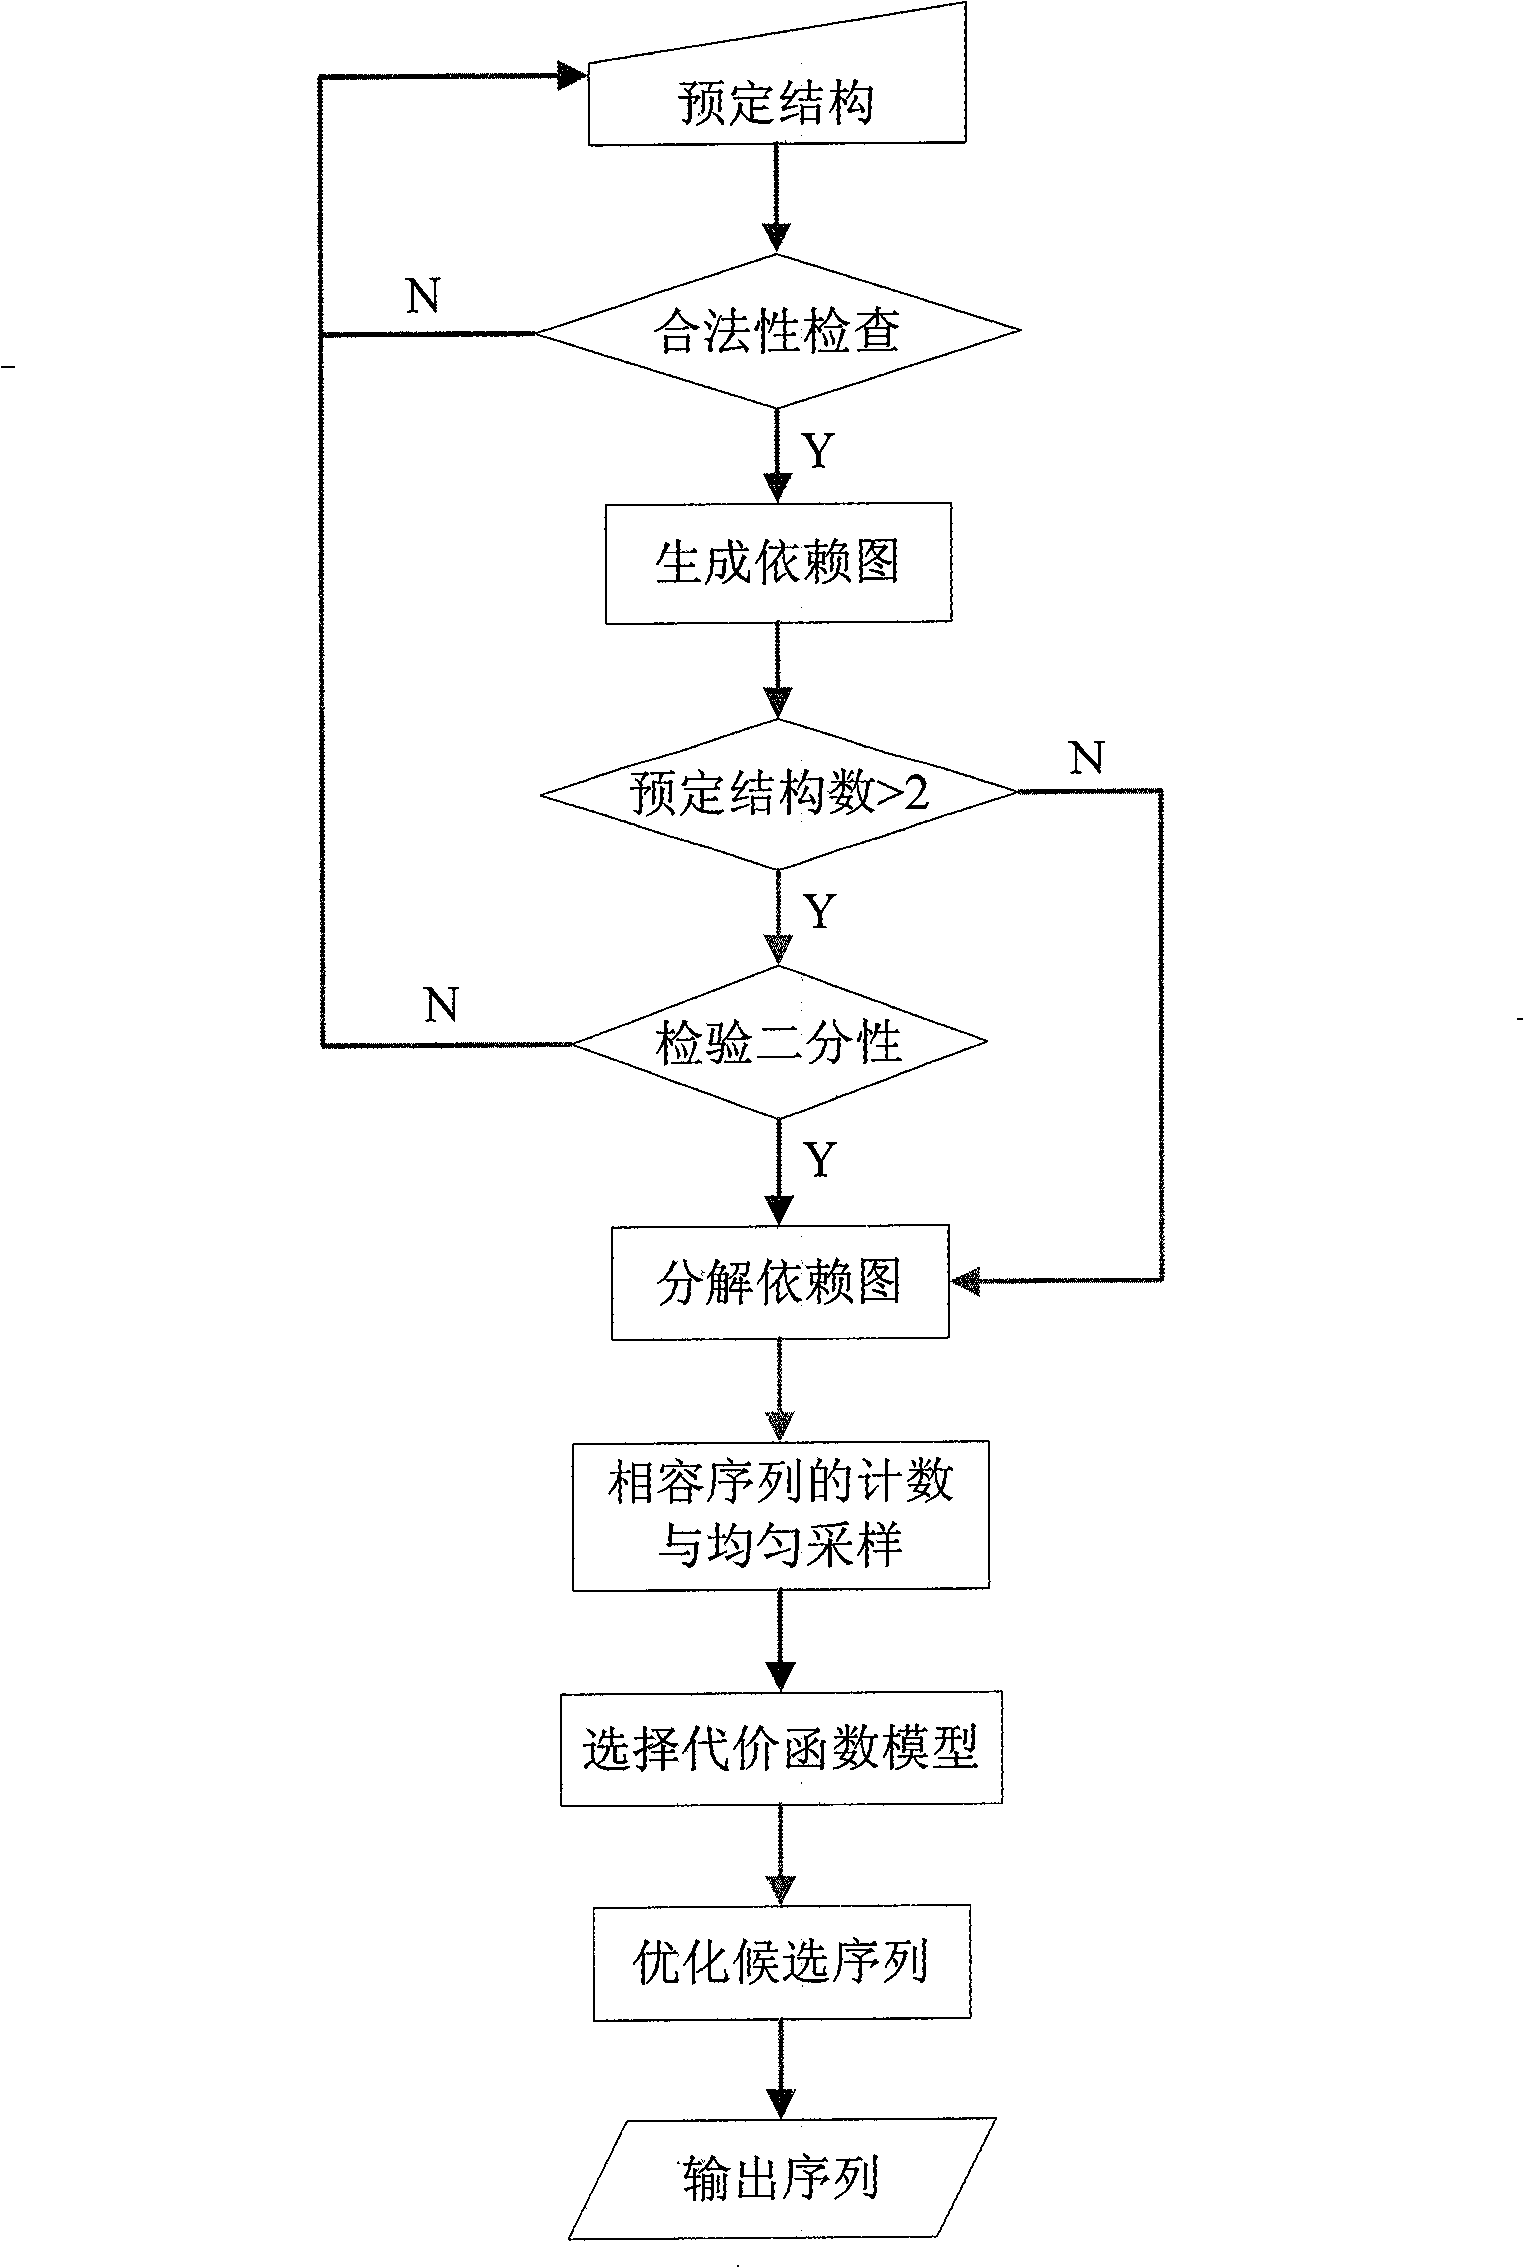 Method for designing ribonucleic acid molecule with multiple steadiness structures